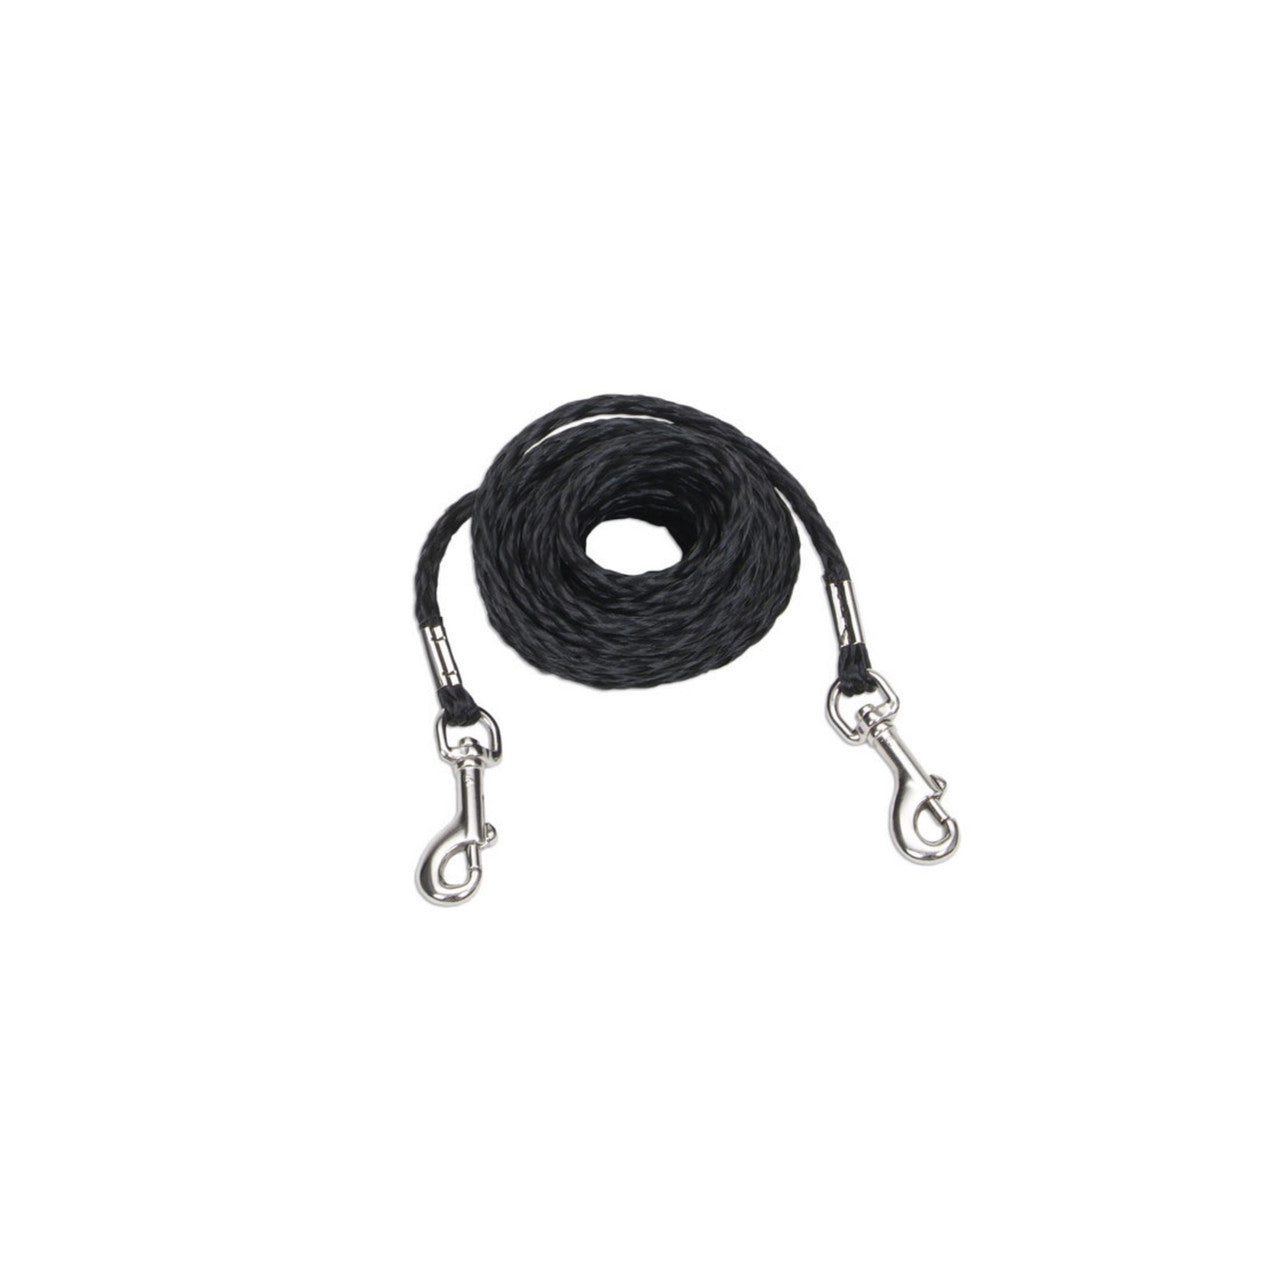 Coastal Poly Petite Dog Tie Out Black 5/32 in x 10 ft